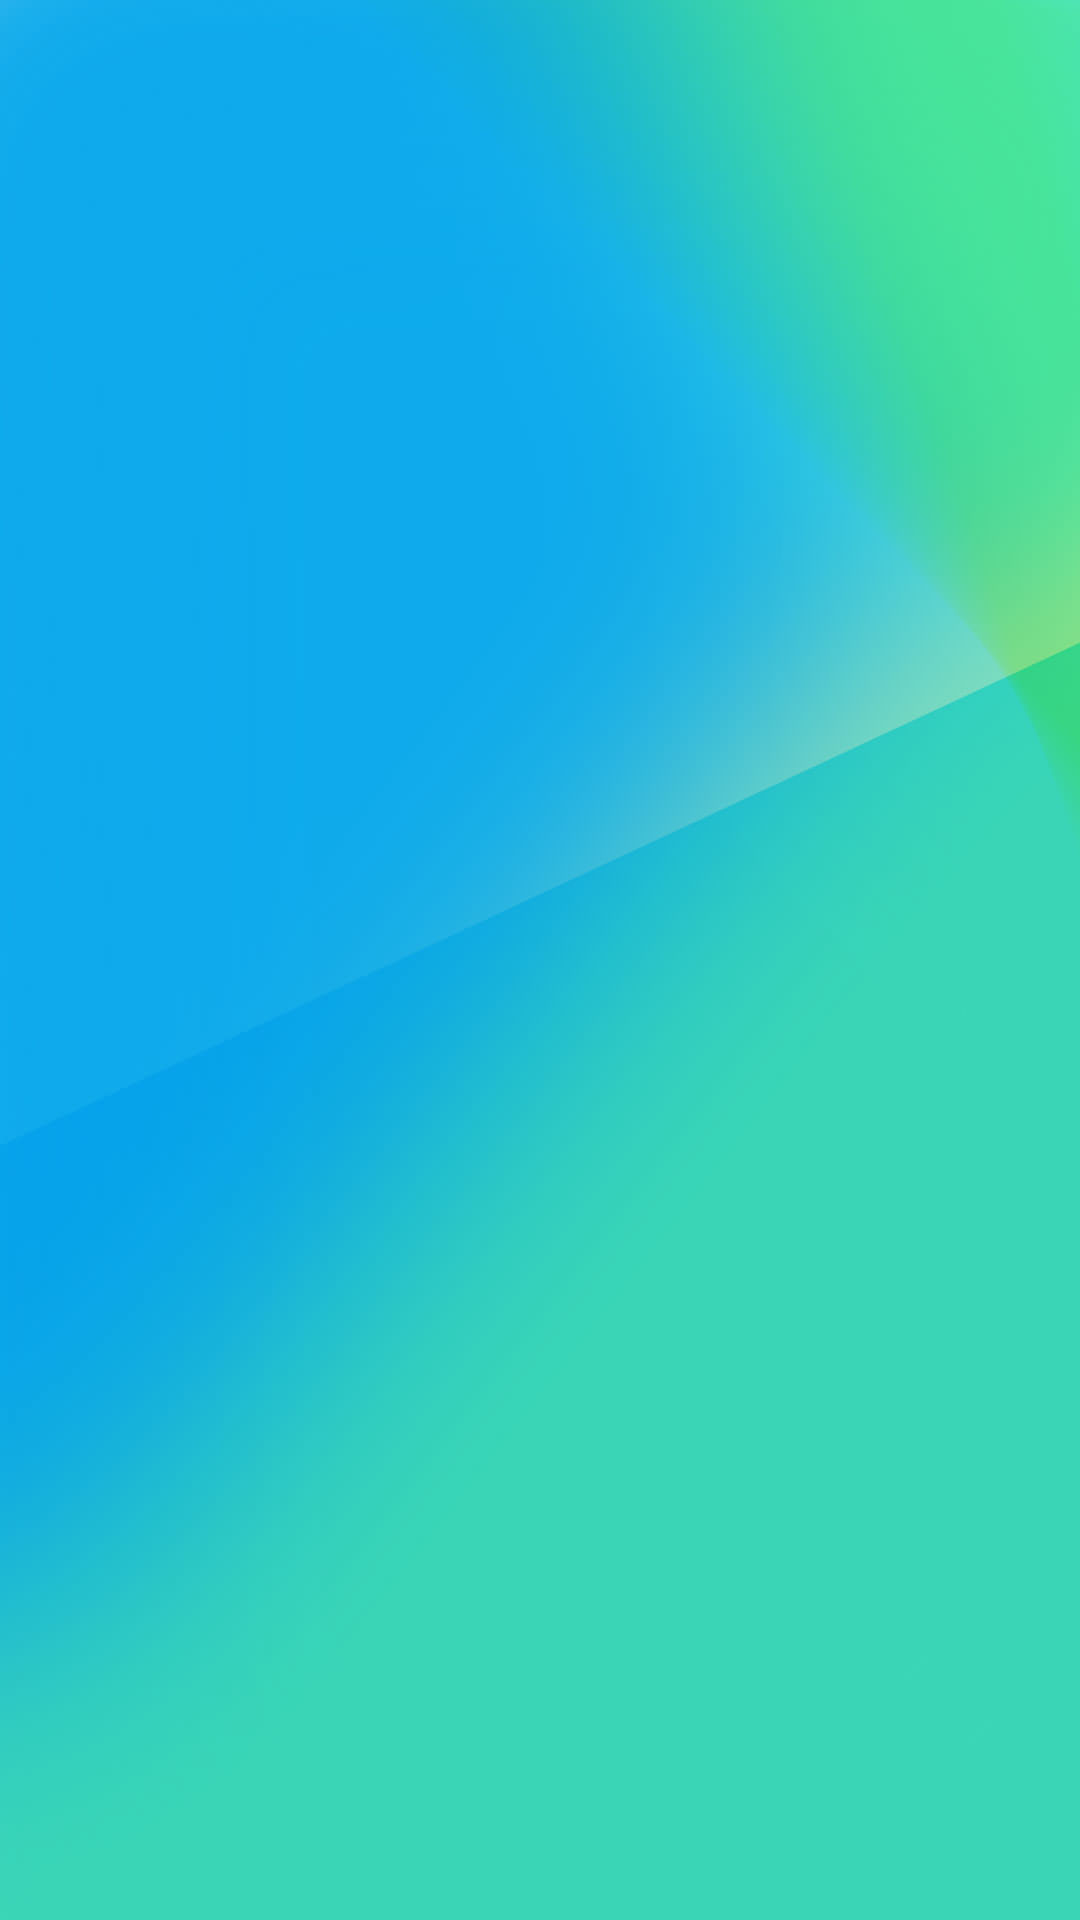 android stock wallpapers,green,blue,aqua,daytime,turquoise